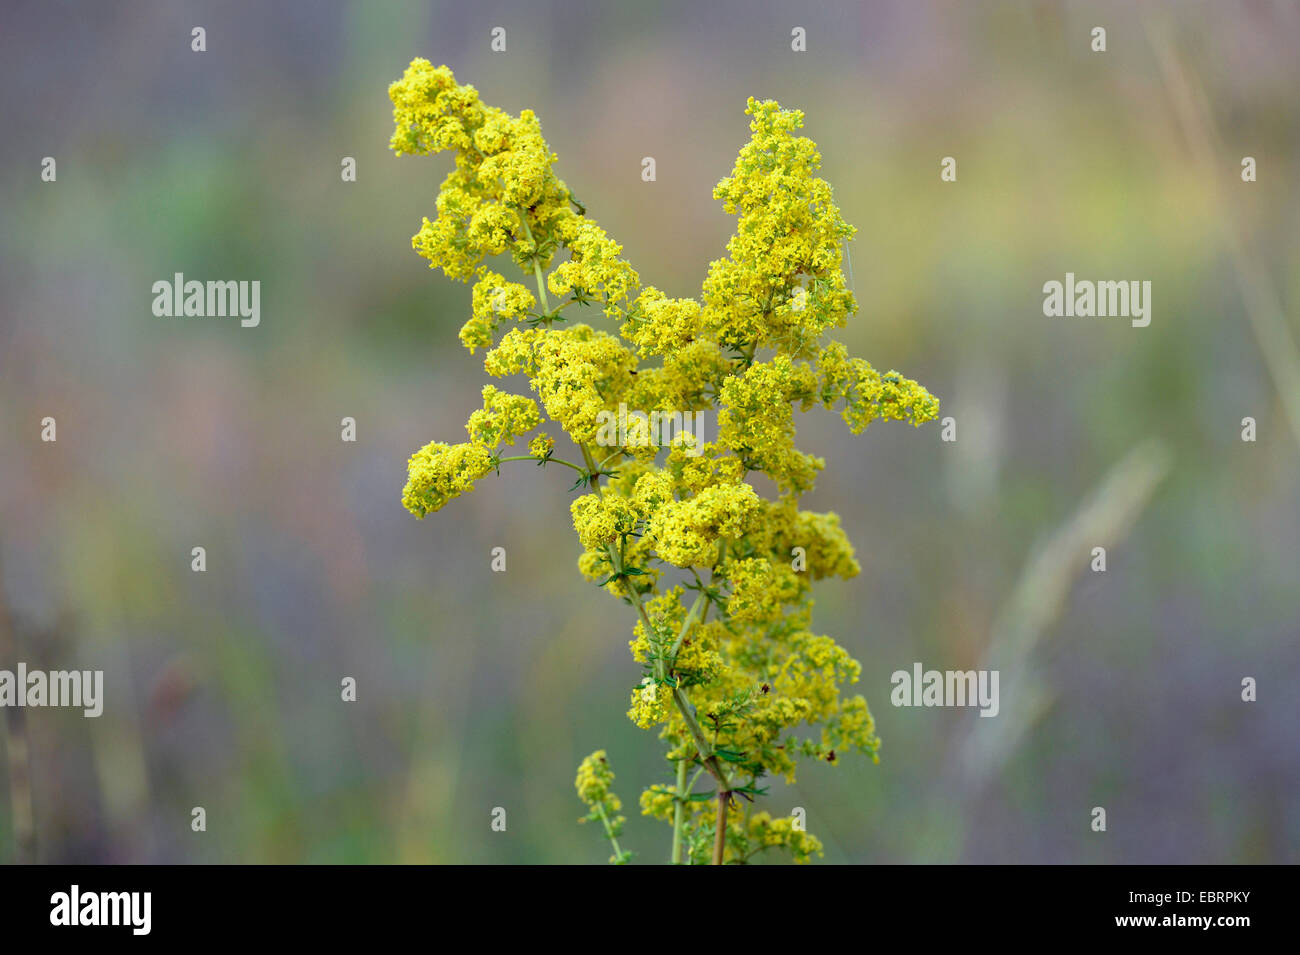 Lady's bedstraw, Yellow bedstraw, Yellow spring bedstraw (Galium verum), blooming, Germany, Bavaria Stock Photo